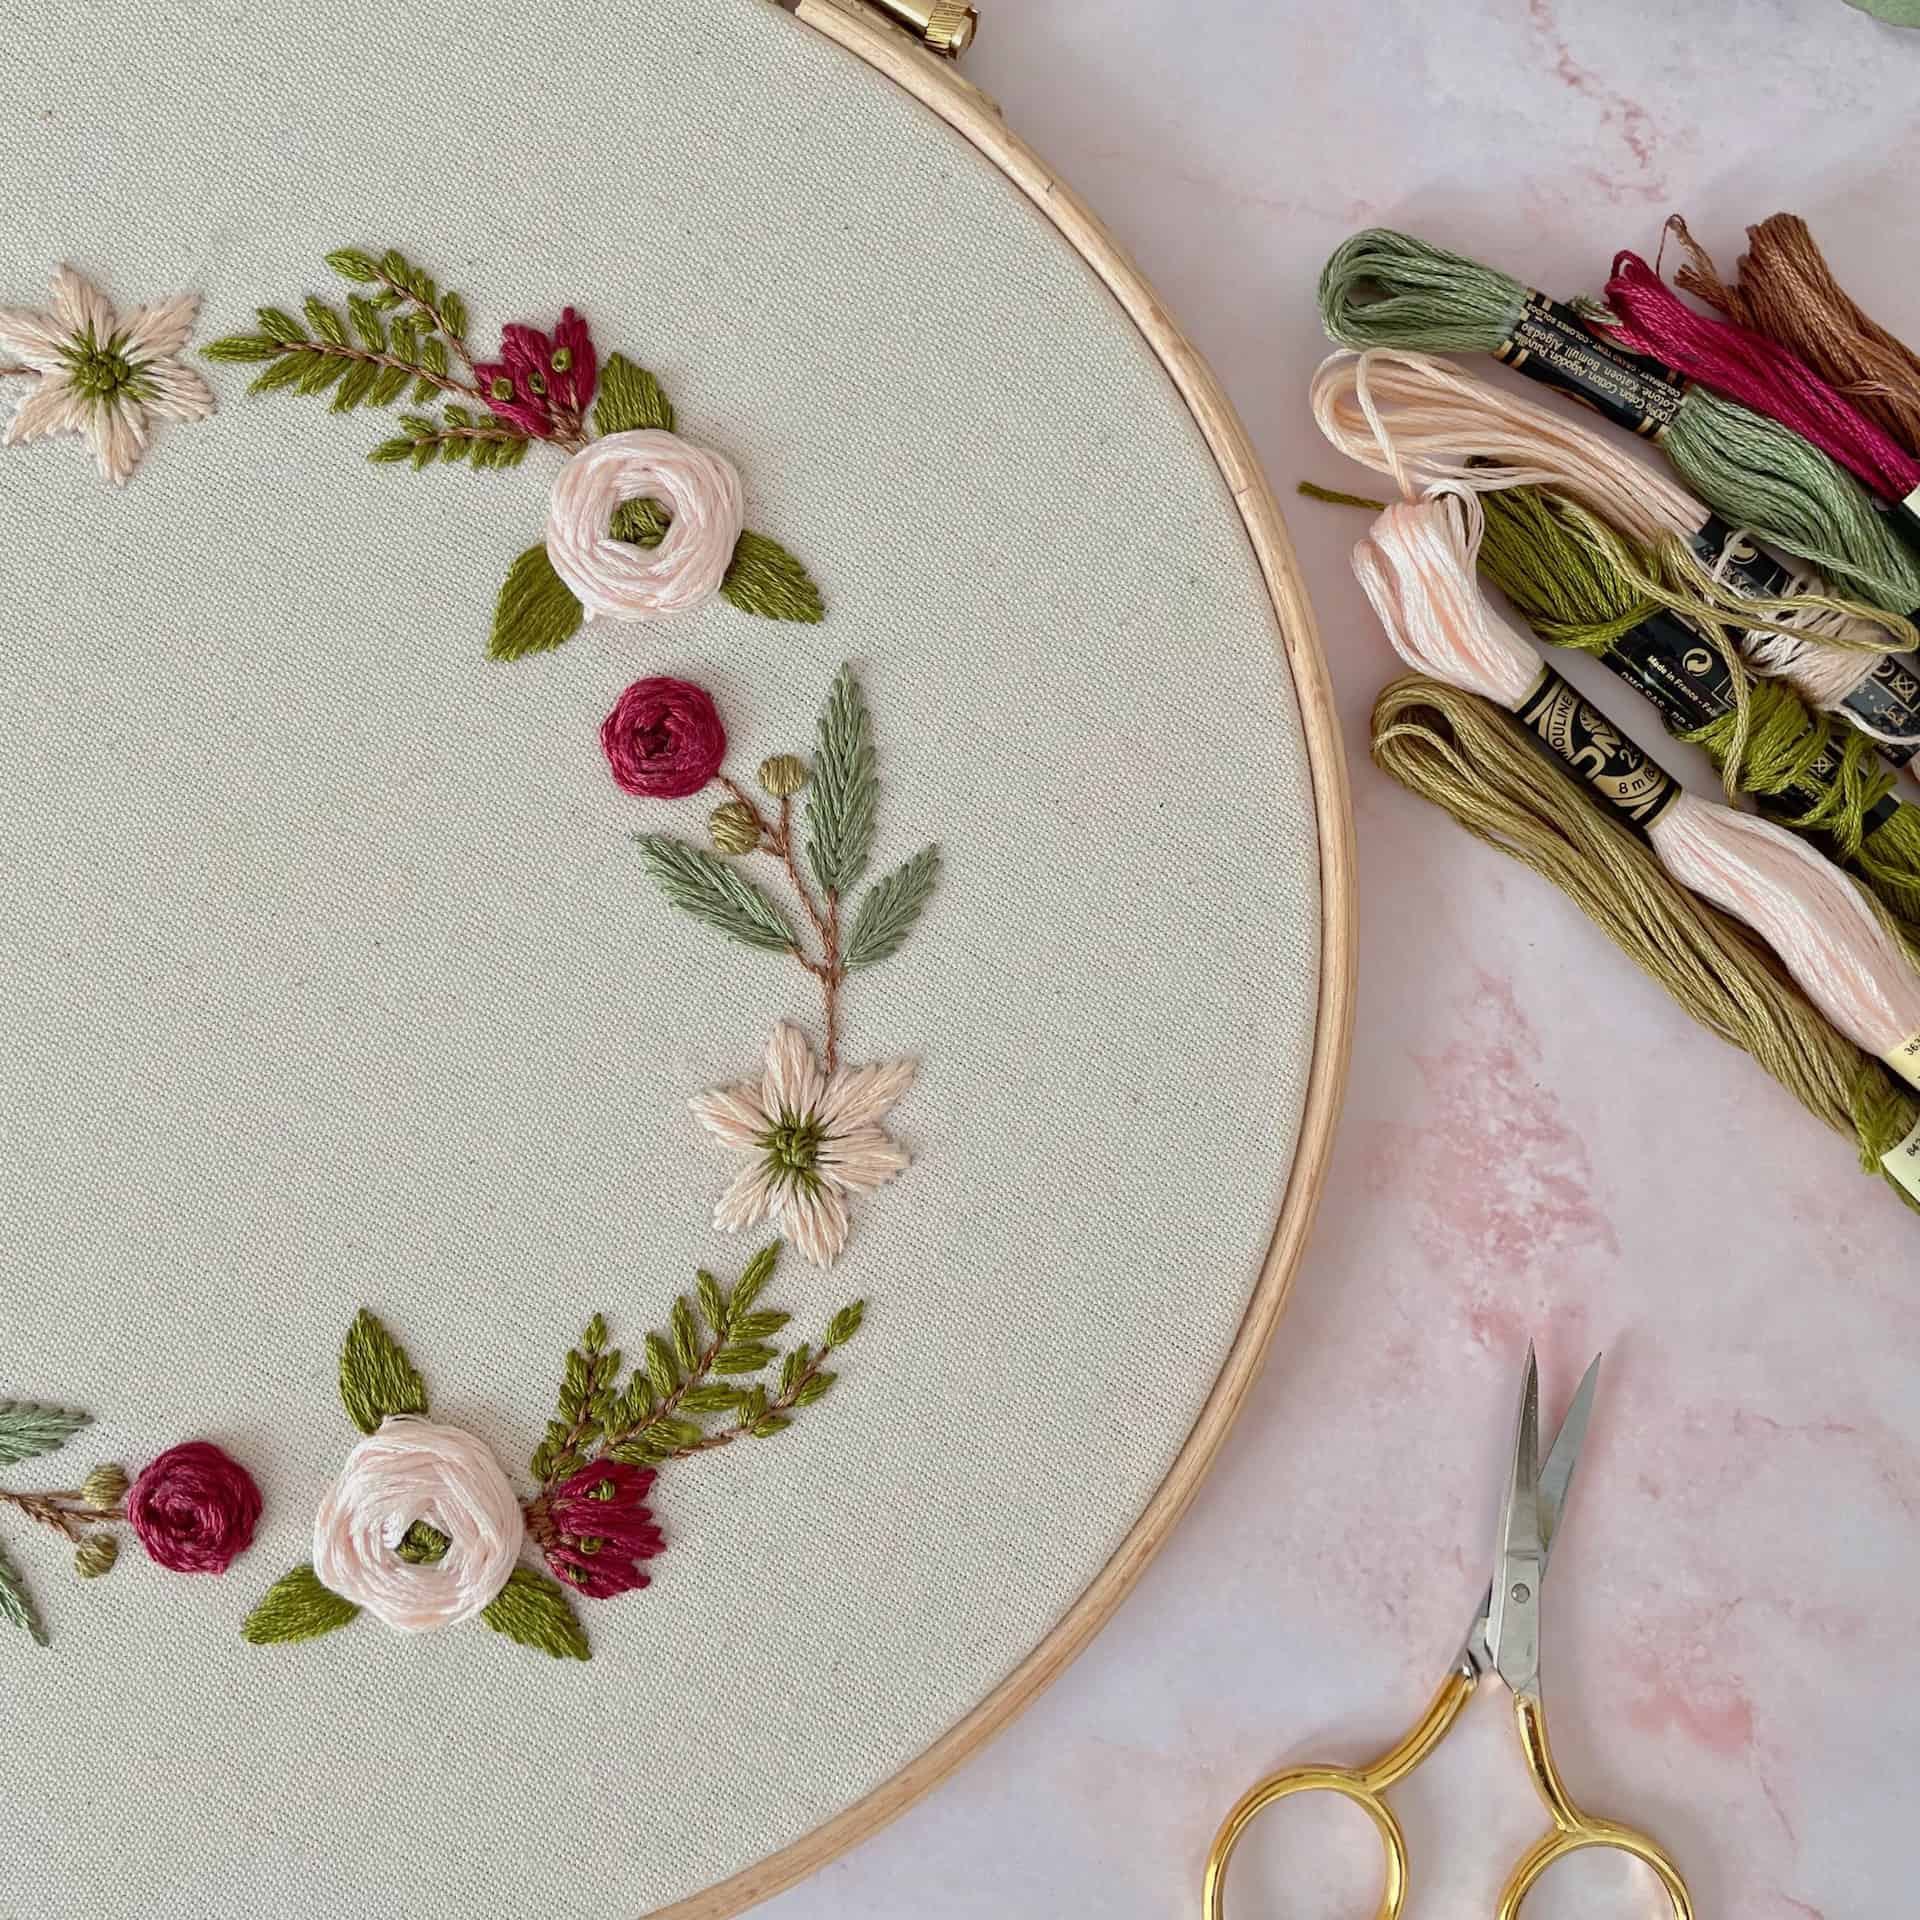 Embroidery – how to start the adventure of embroidery?